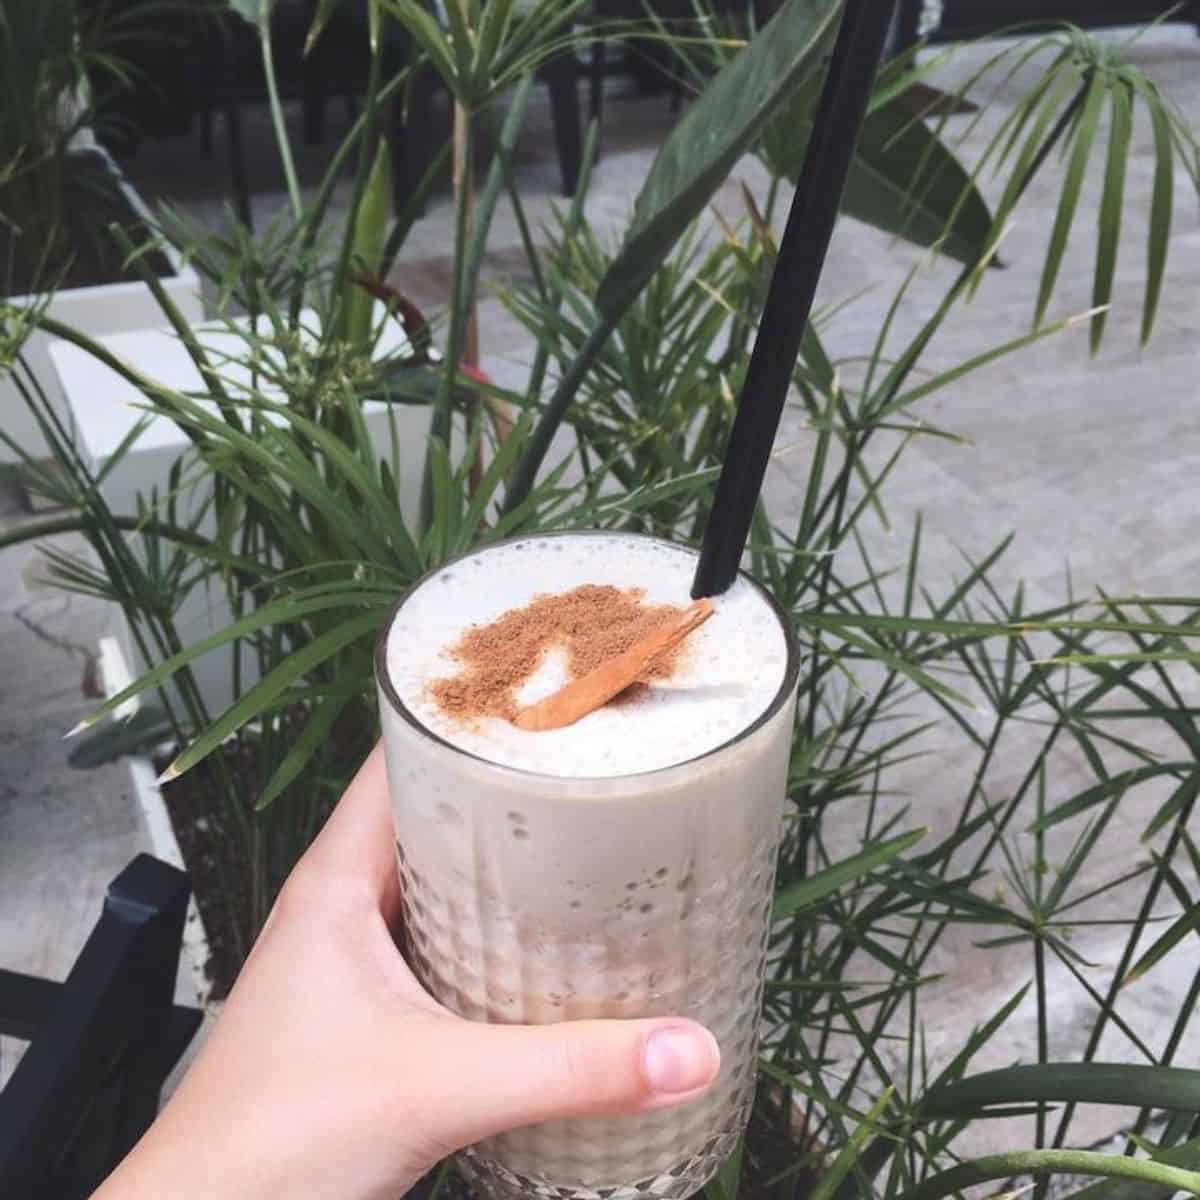 A hand holding a glass of iced chai latte with garnishes on top